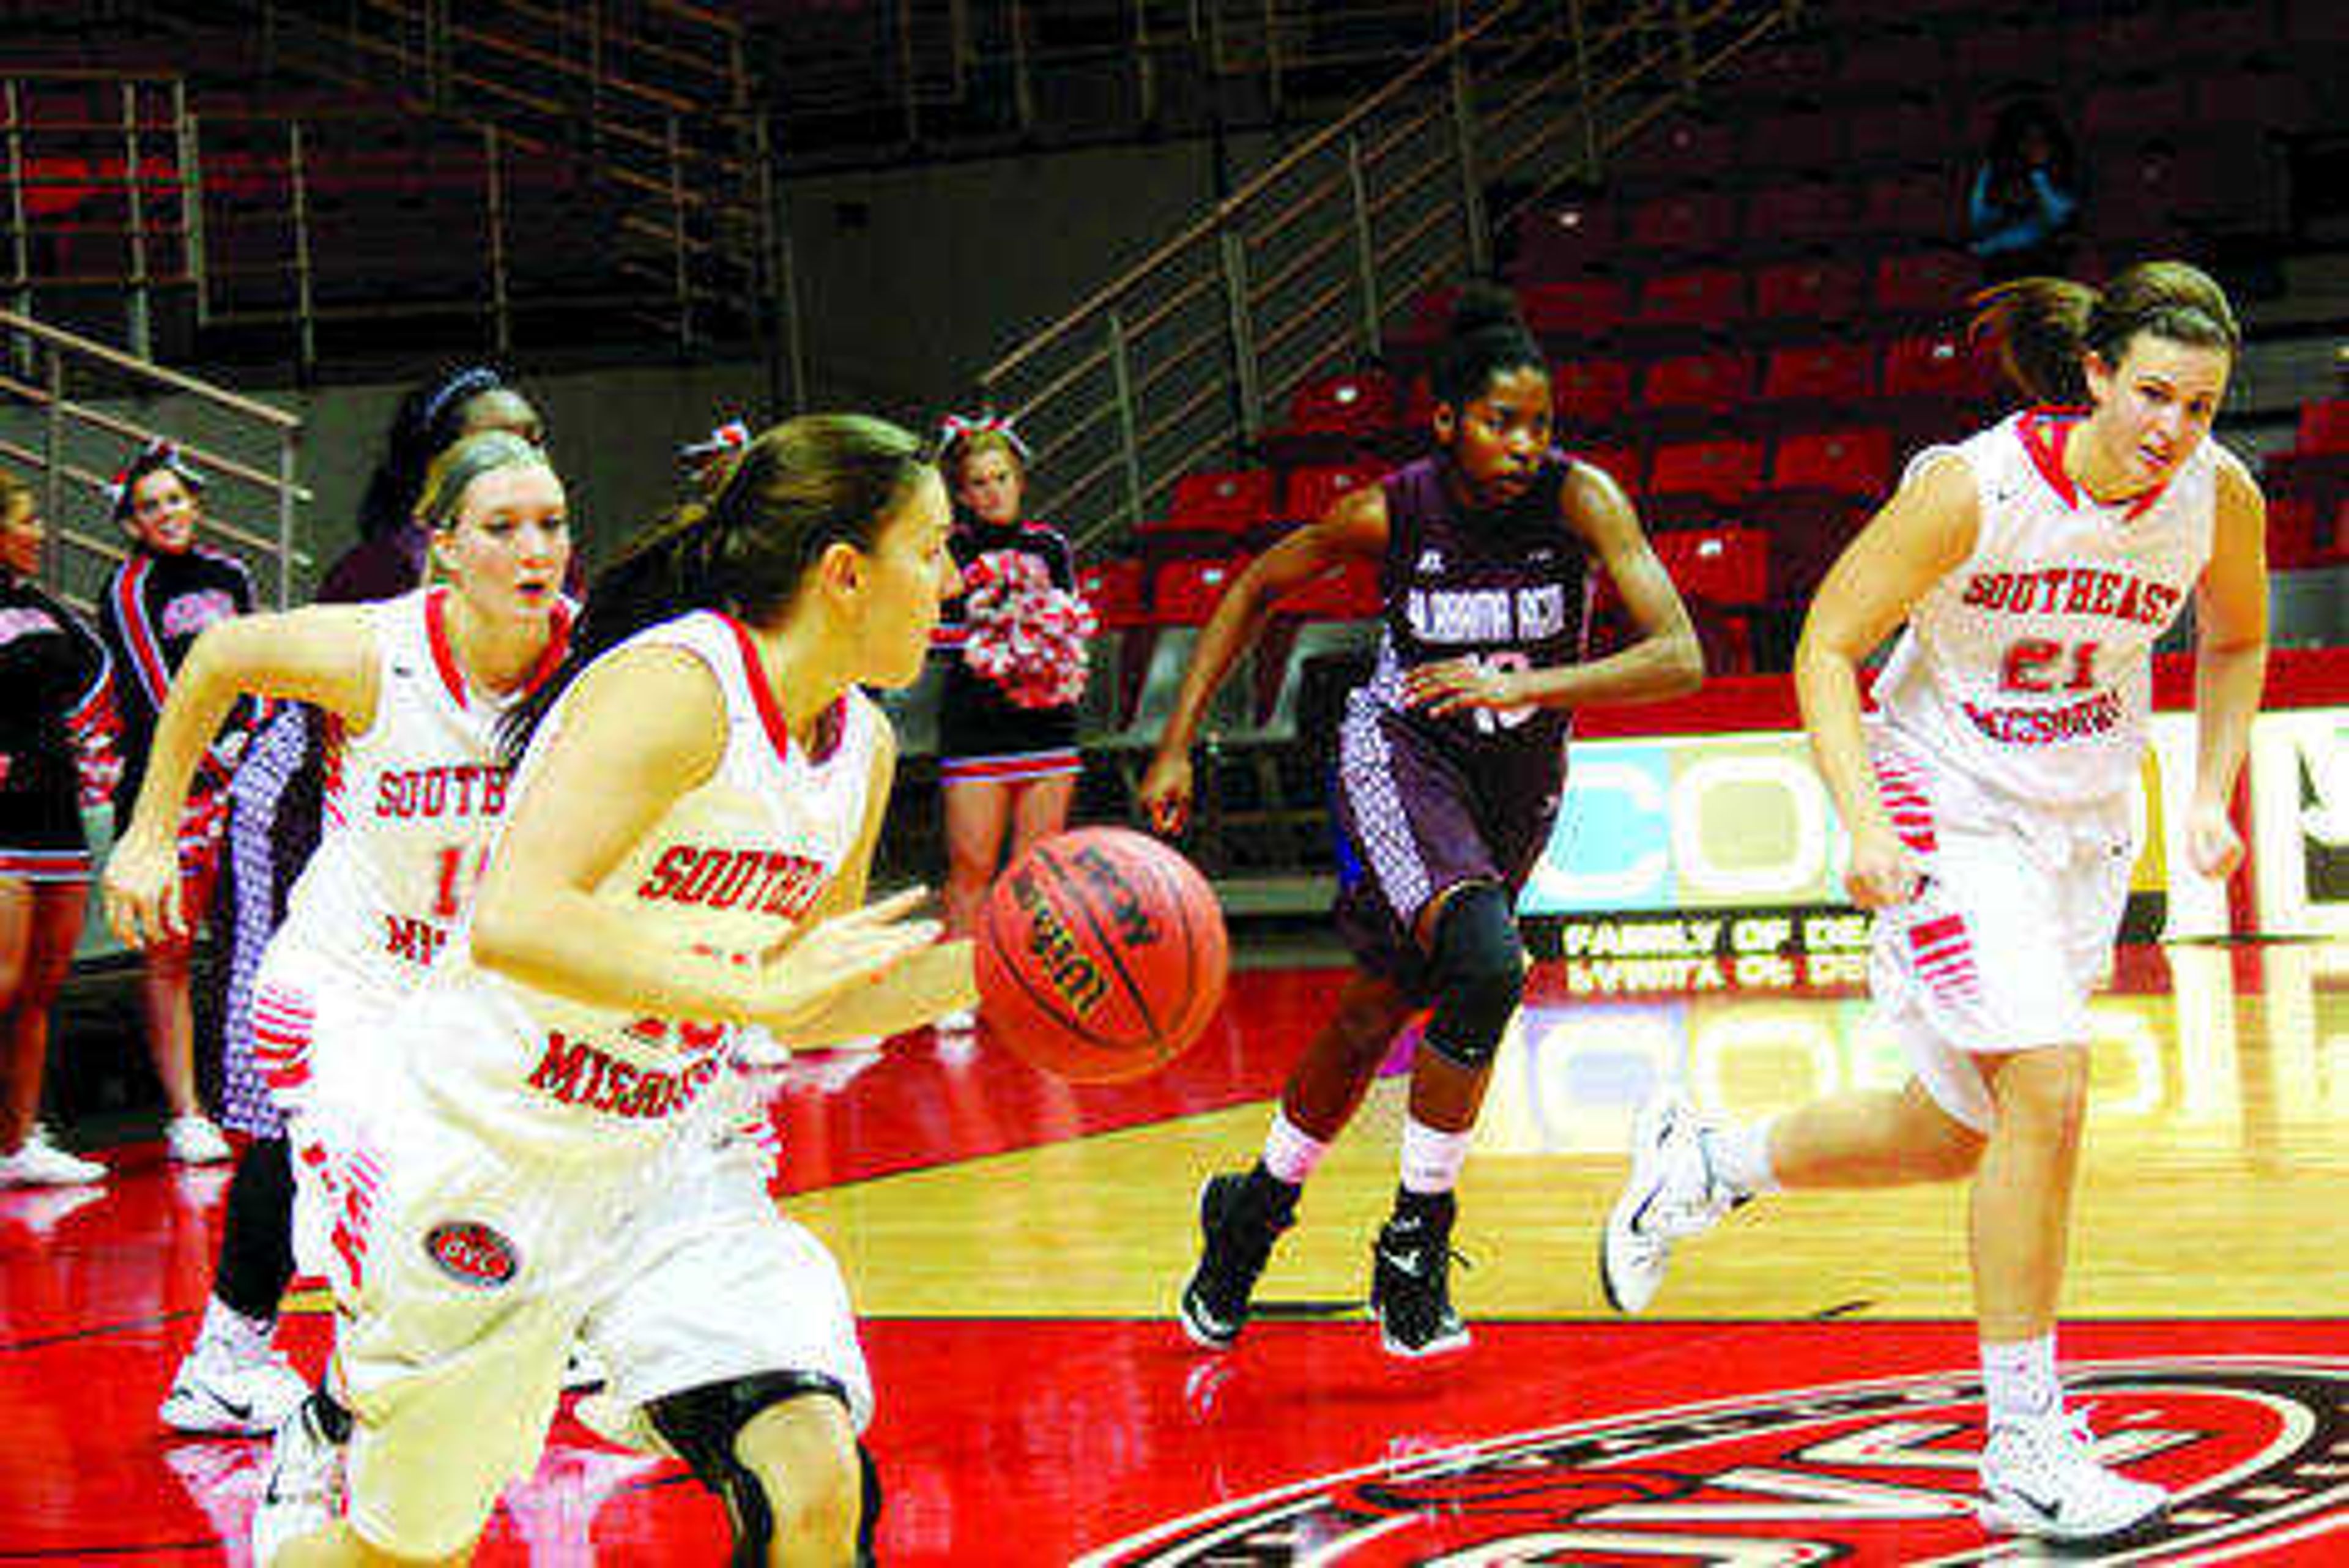 The Southeast Missouri State women's basketball team defeated Alabama A&M 66-38 in its season opener at the Show Me Center. (Photo by Isaiah Adams)